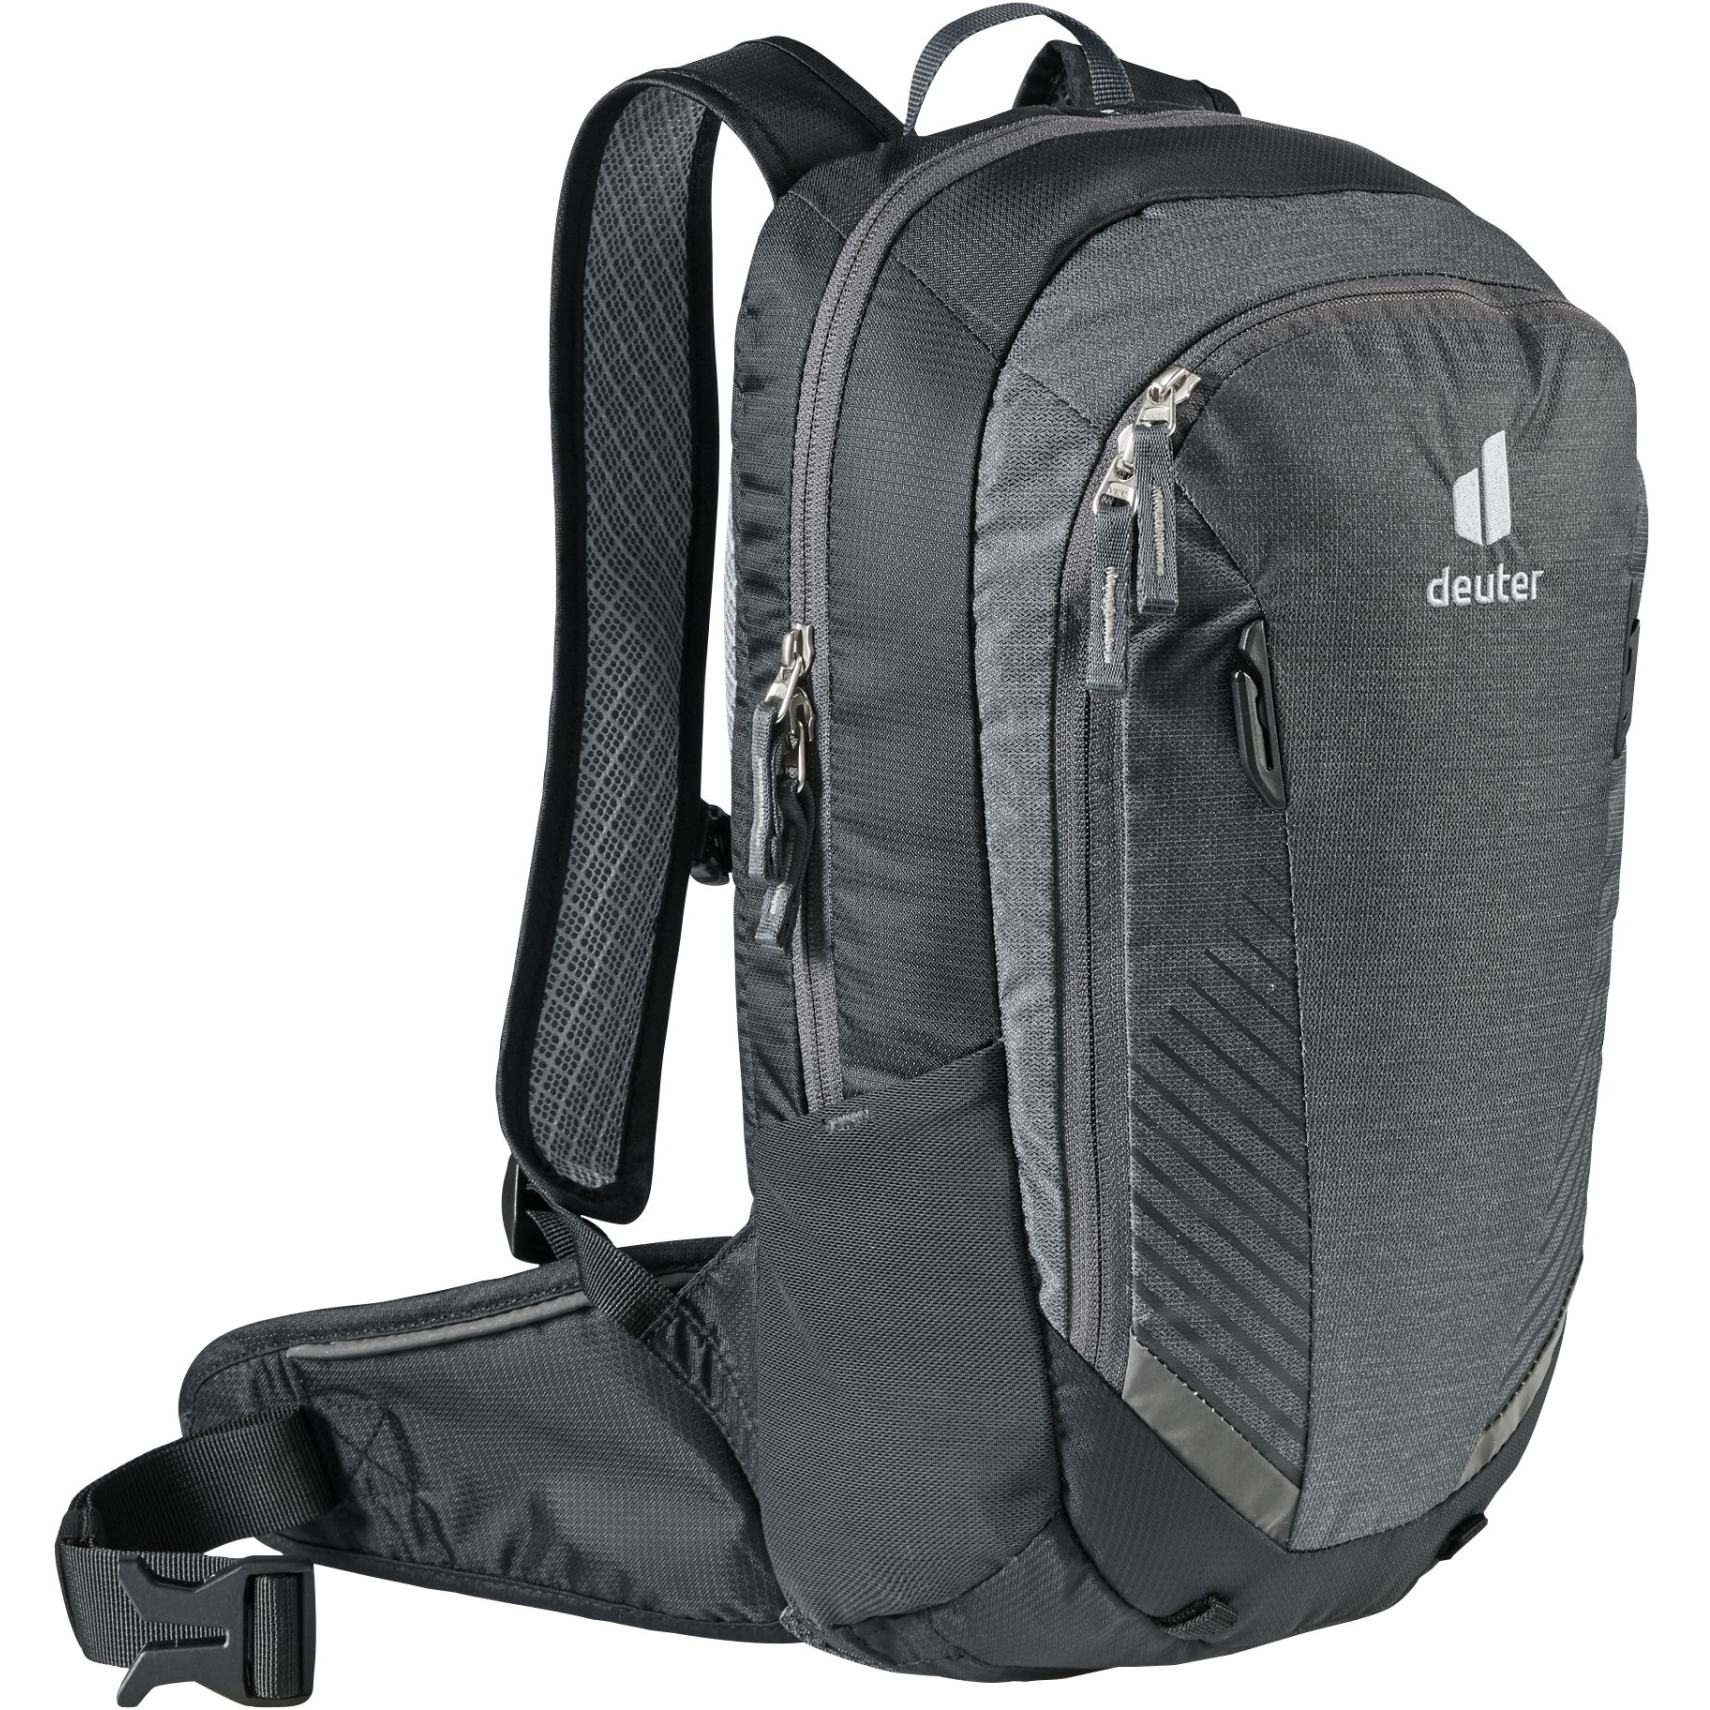 Picture of Deuter Compact 8 JR MTB Childrens Backpack - graphite-black